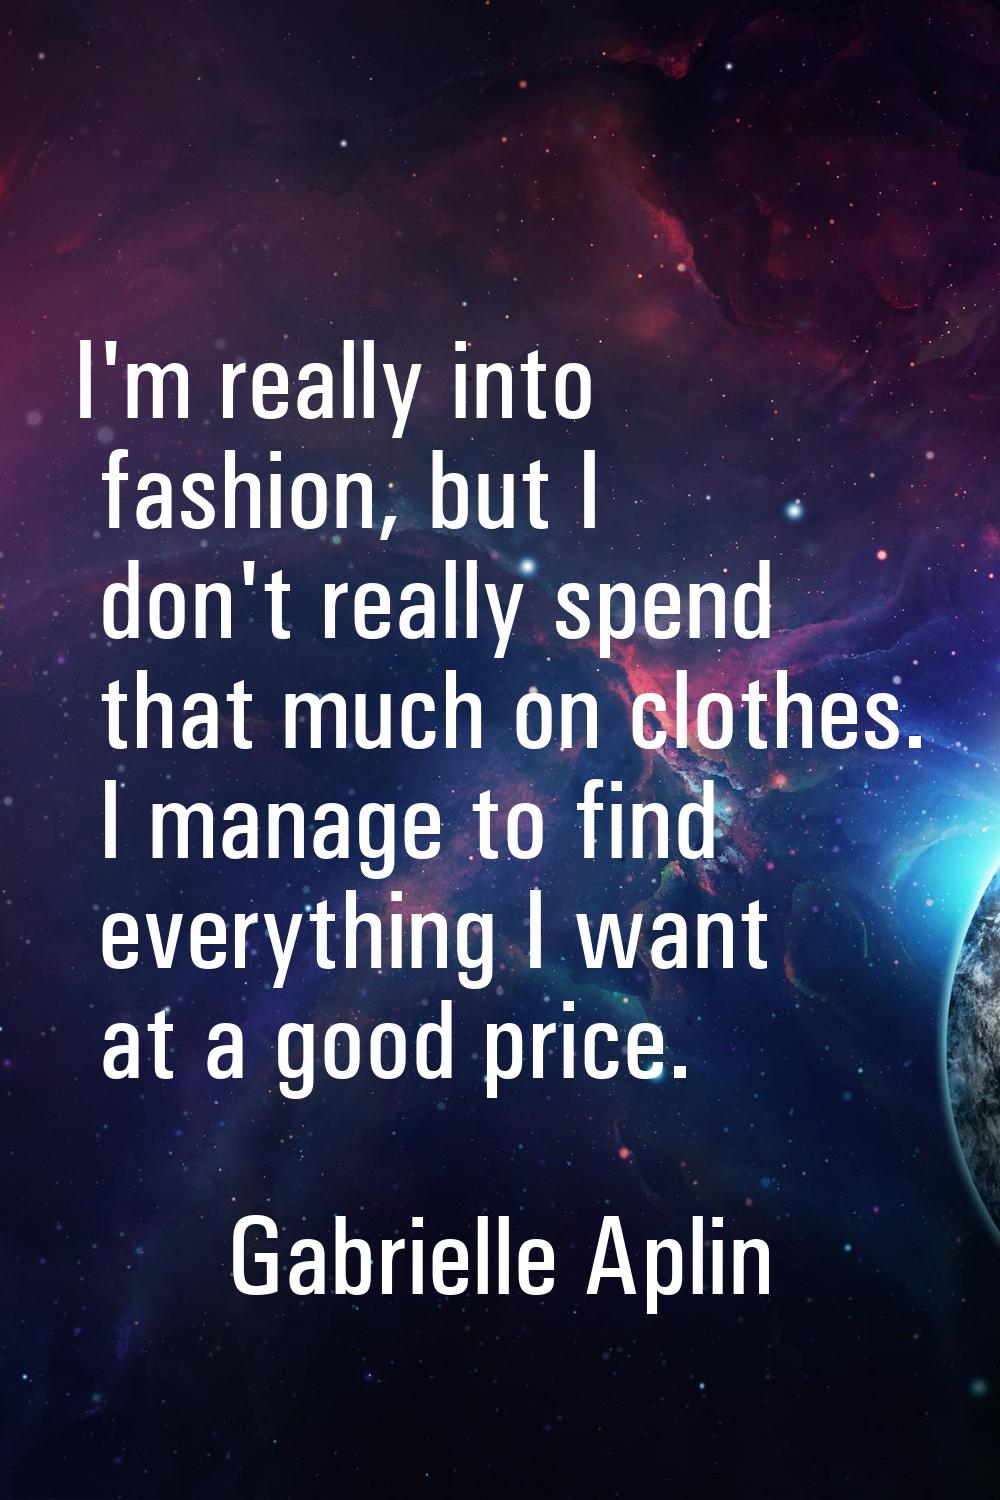 I'm really into fashion, but I don't really spend that much on clothes. I manage to find everything